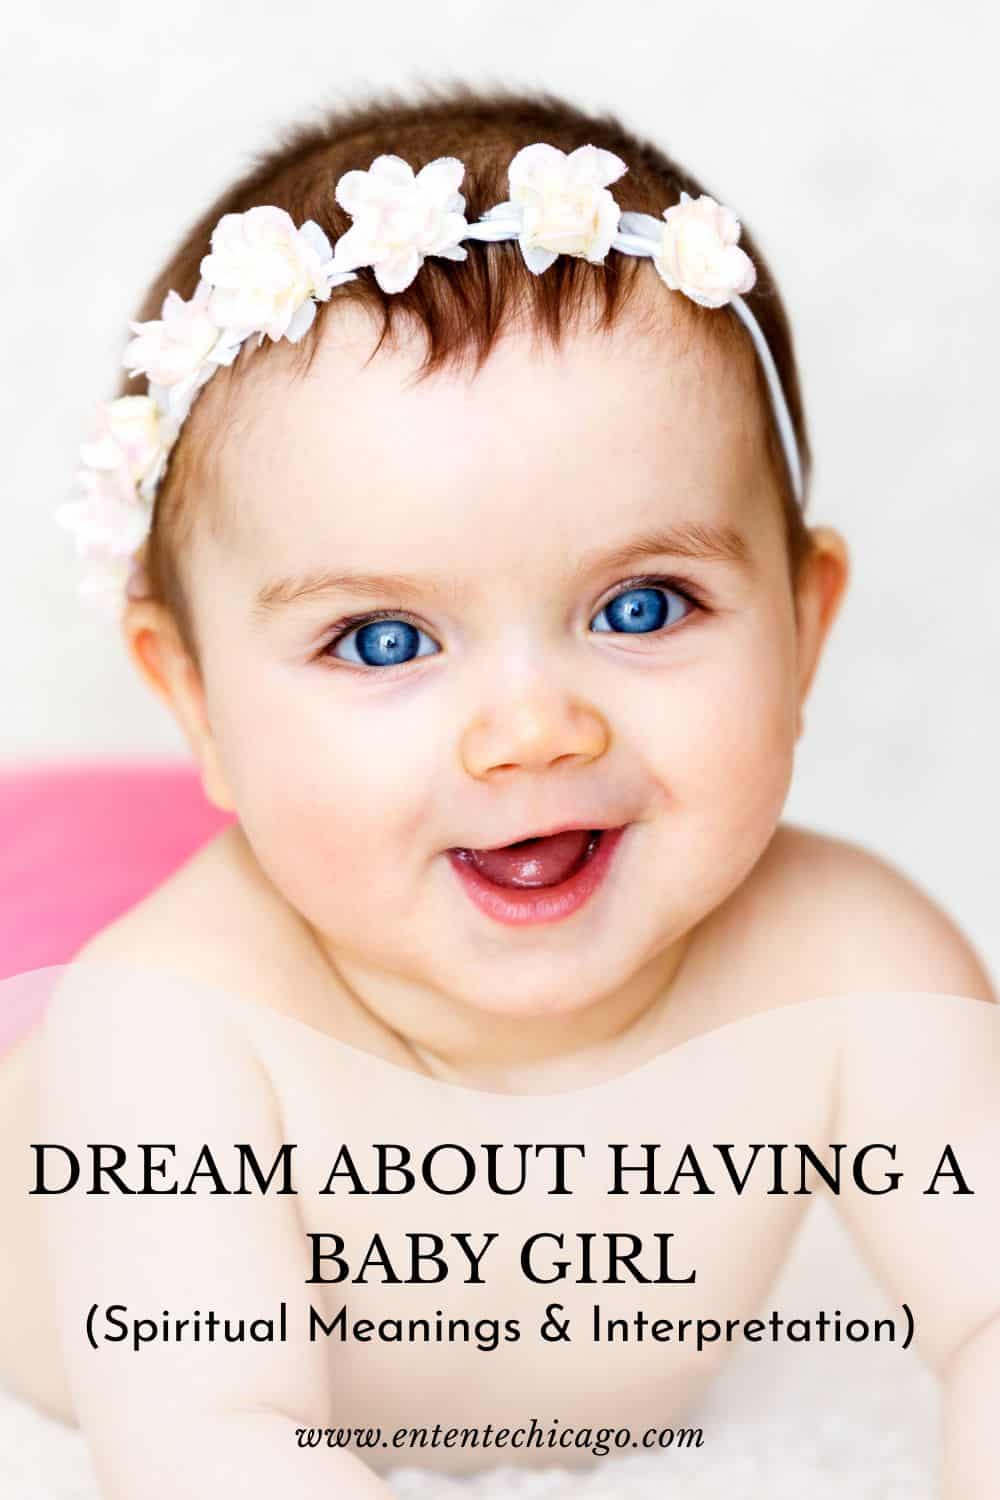 Dream About Having A Baby Girl (Spiritual Meanings & Interpretation)